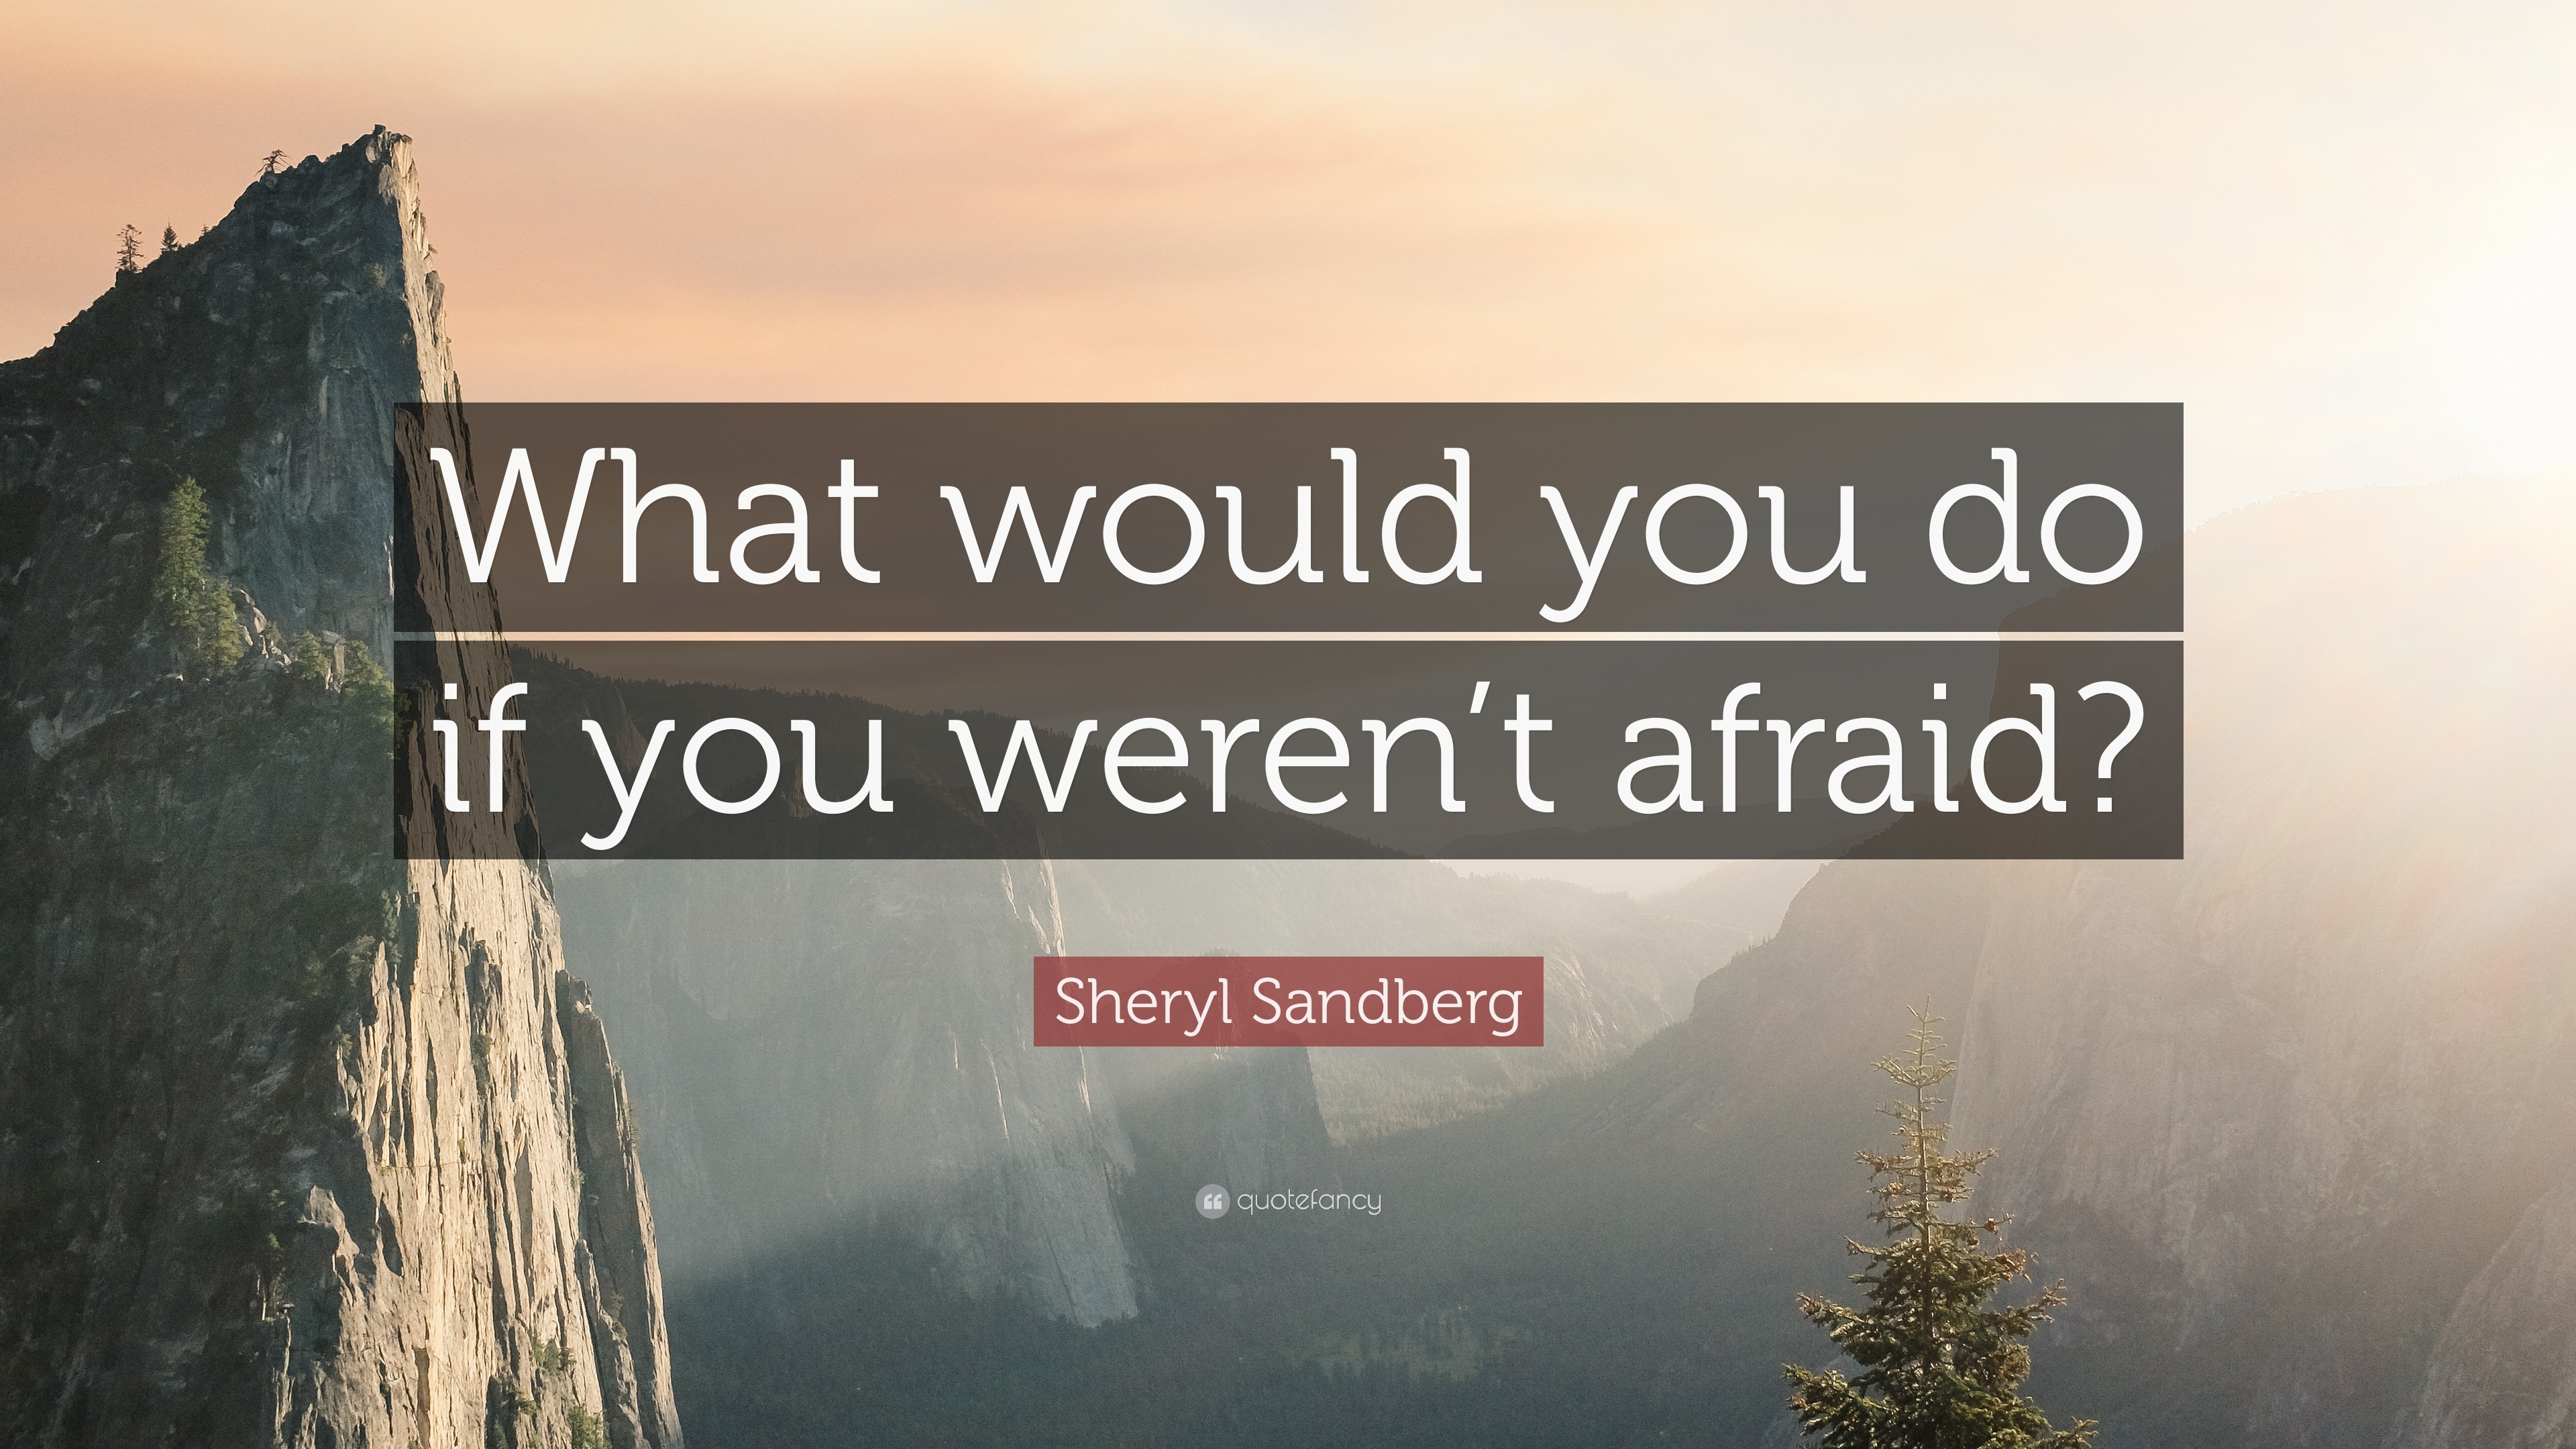 Sheryl Sandberg Quote: “What would you do if you weren’t afraid?” (25